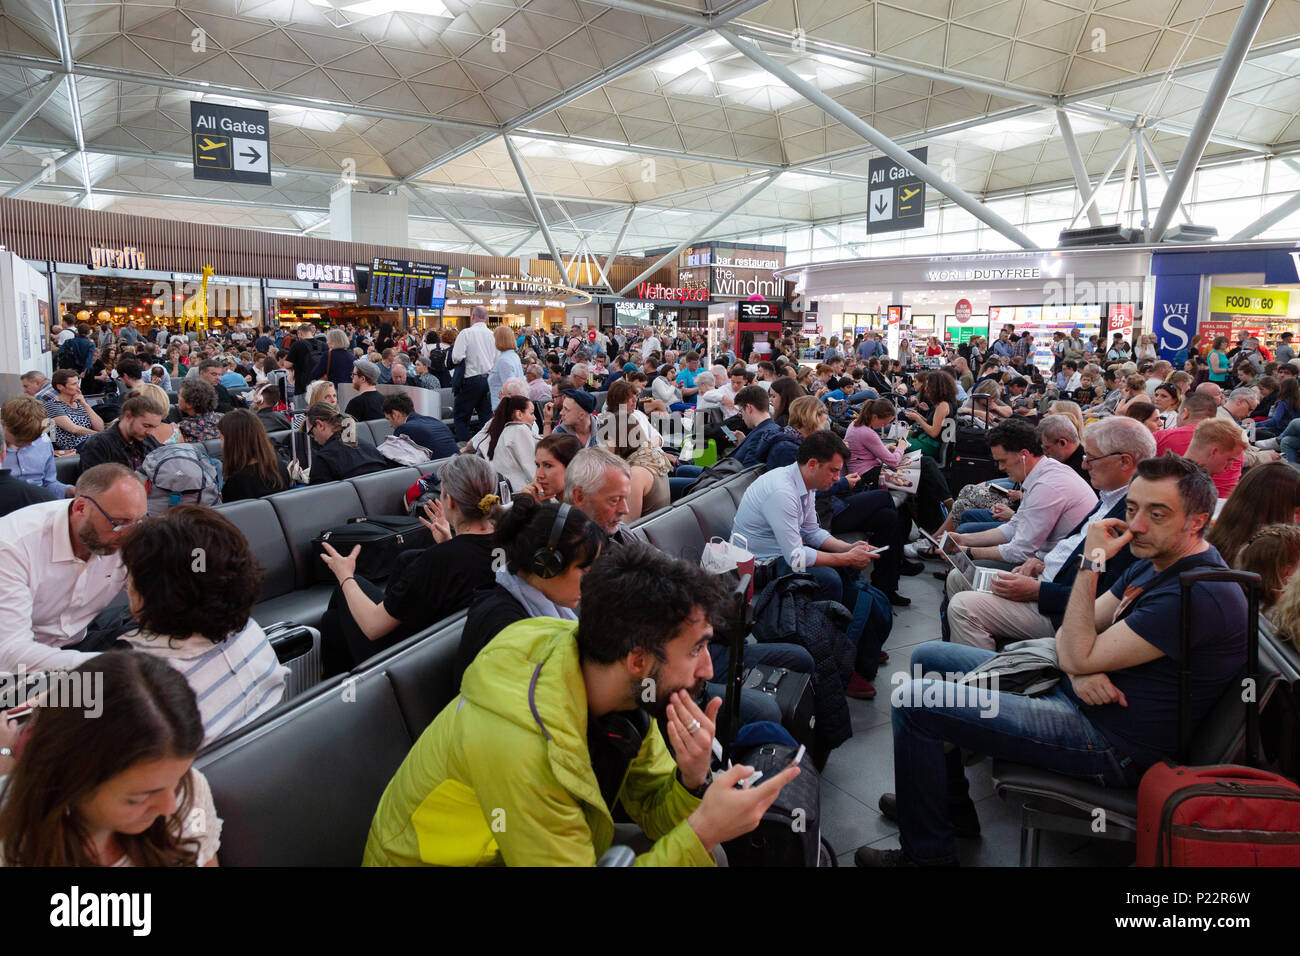 Stansted airport departures, very crowded due to flight cancellations, Stansted airport, Essex London UK Stock Photo